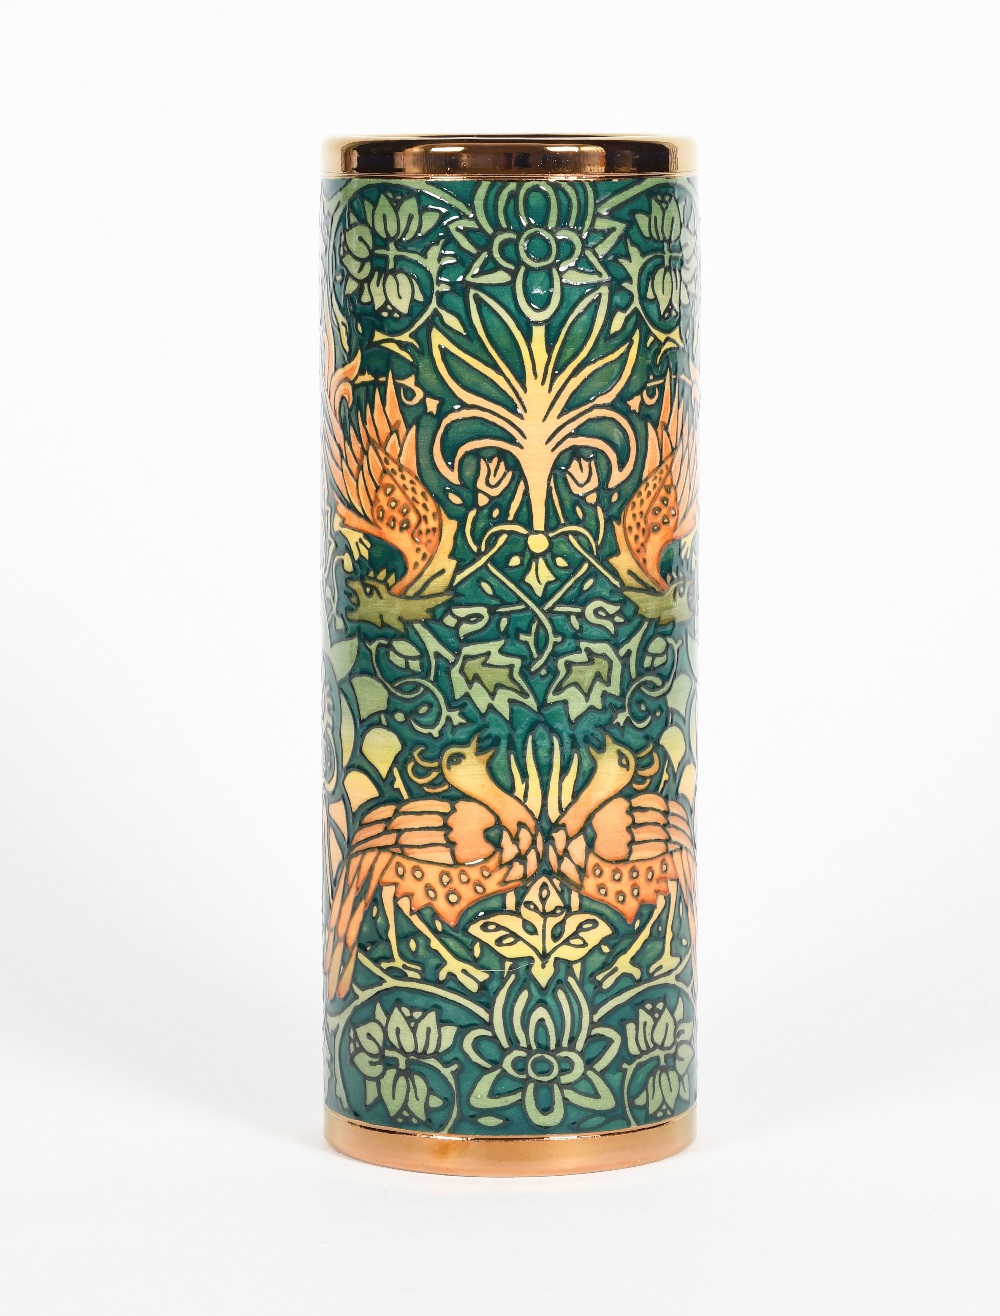 'Dragon and Peacock' a Dennis China Works limited edition Spill vase designed by Sally Tuffin, dated